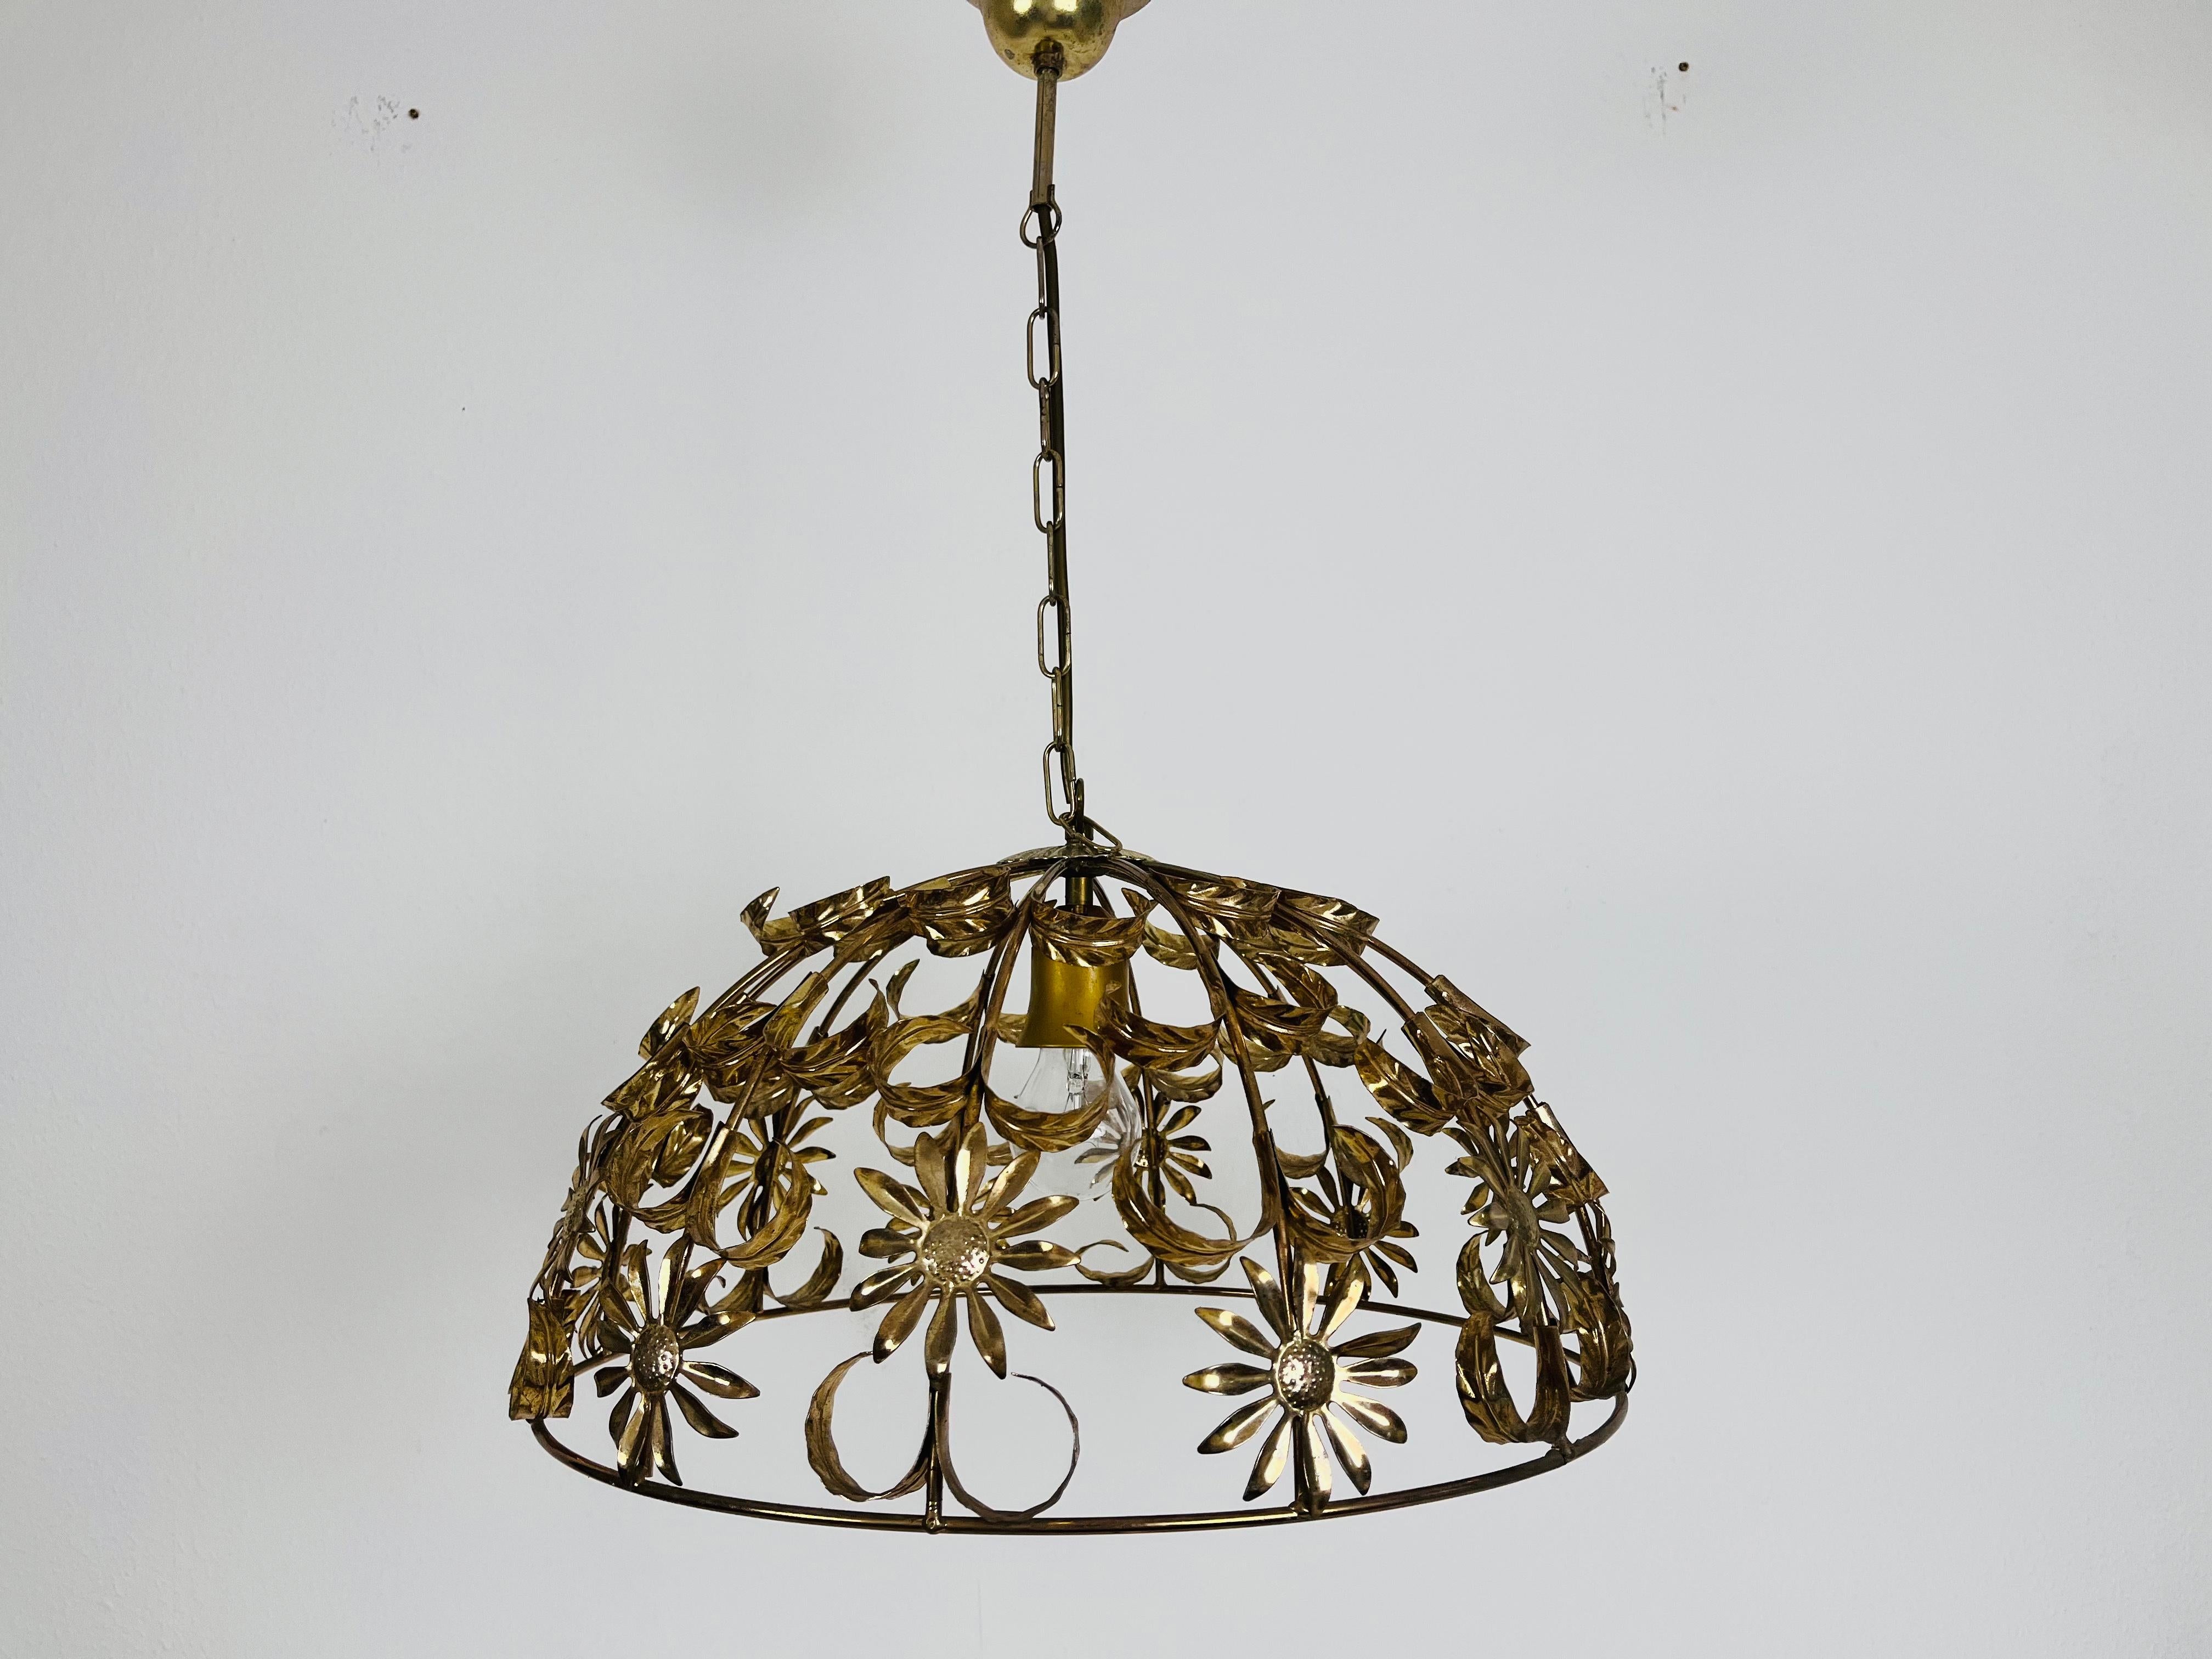 Hollywood Regency Florentine Flower Shape Pendant Lamp Attributed to Banci Firenze, 1970s For Sale